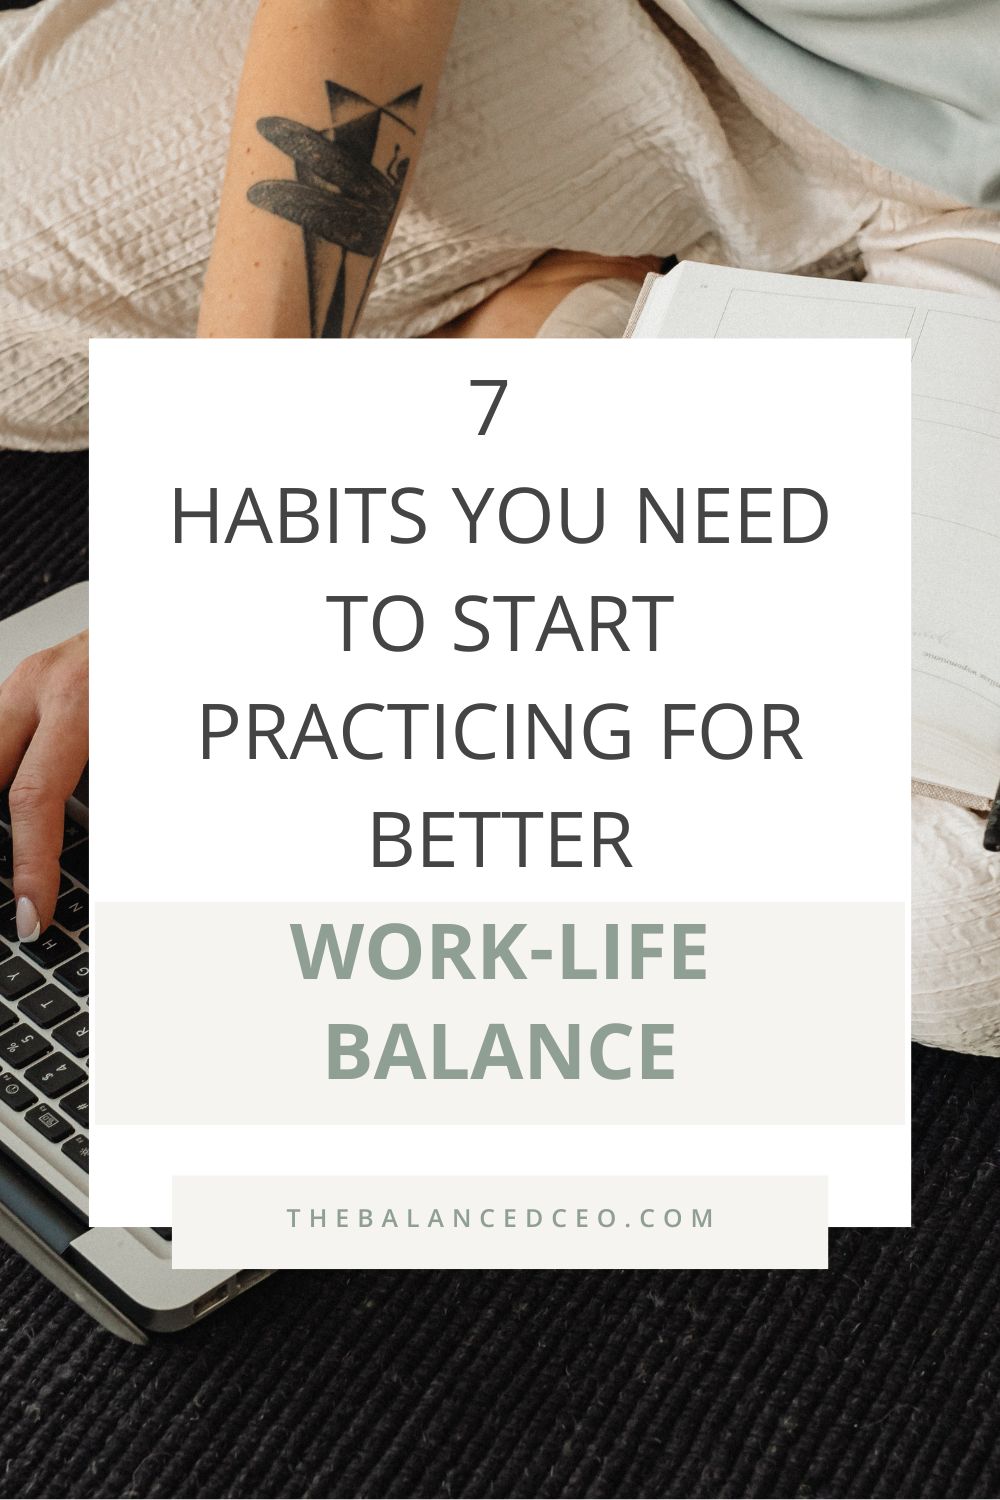 7 Habits You Need to Start Practicing for Better Work-Life Balance